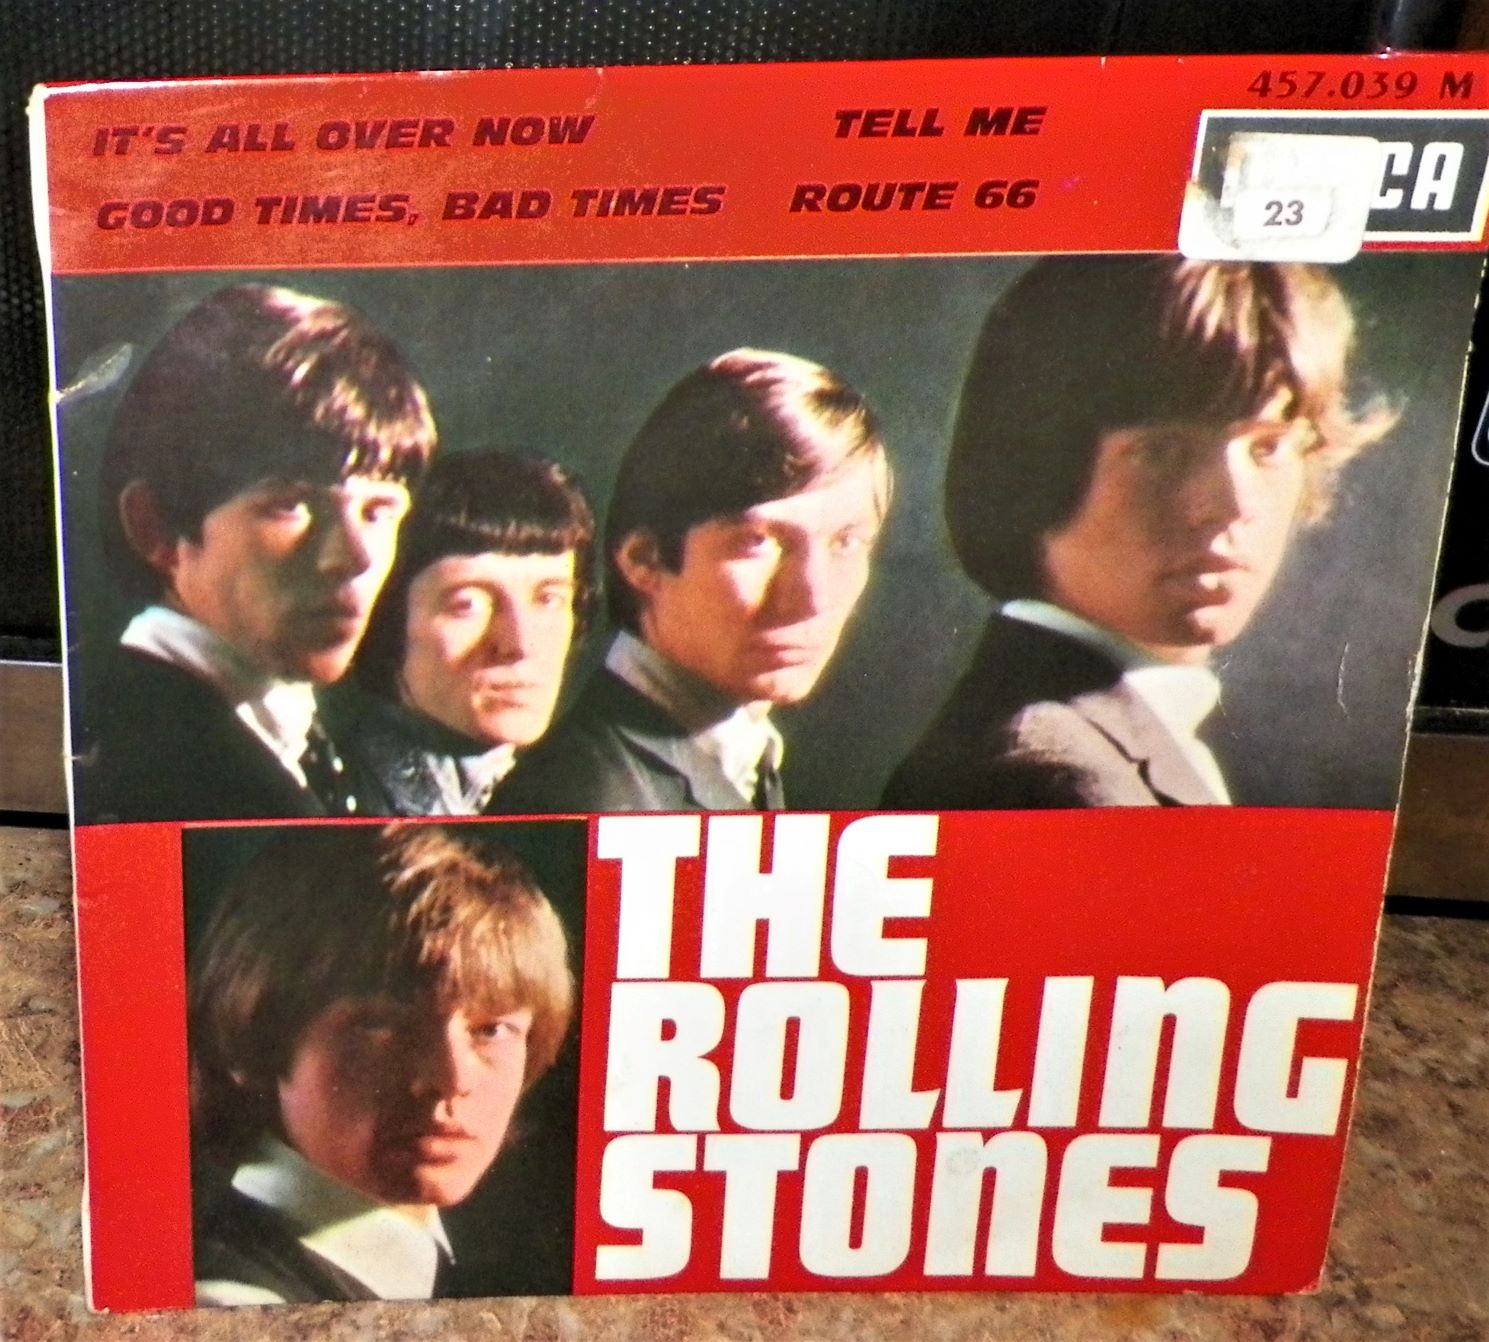 ALBUM 45 RECORD ROLLING STONES ITS ALL OVER NOW w COVER 1A_A.JPG